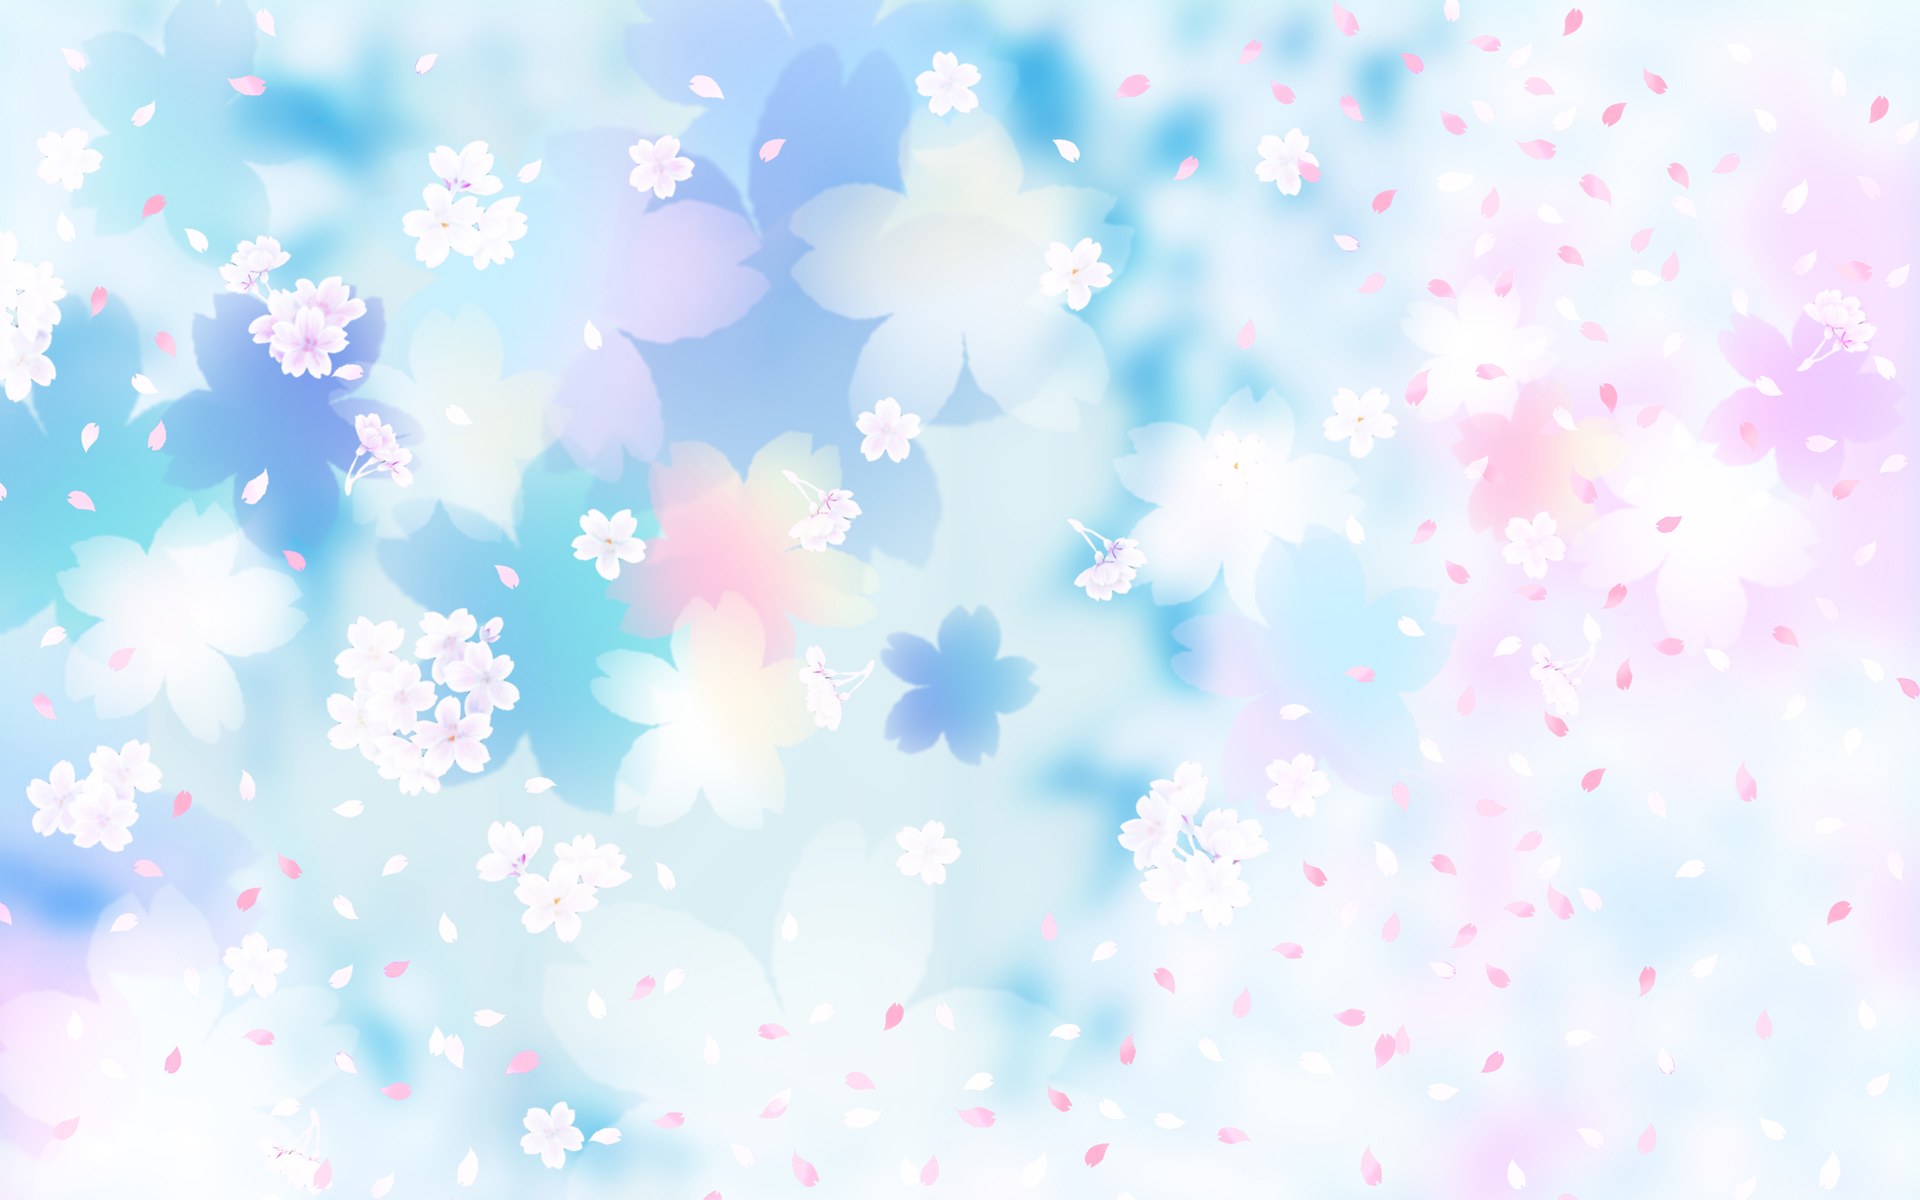 Flower Pattern Background Blue And Pink Flowers Flying Petals Jpg